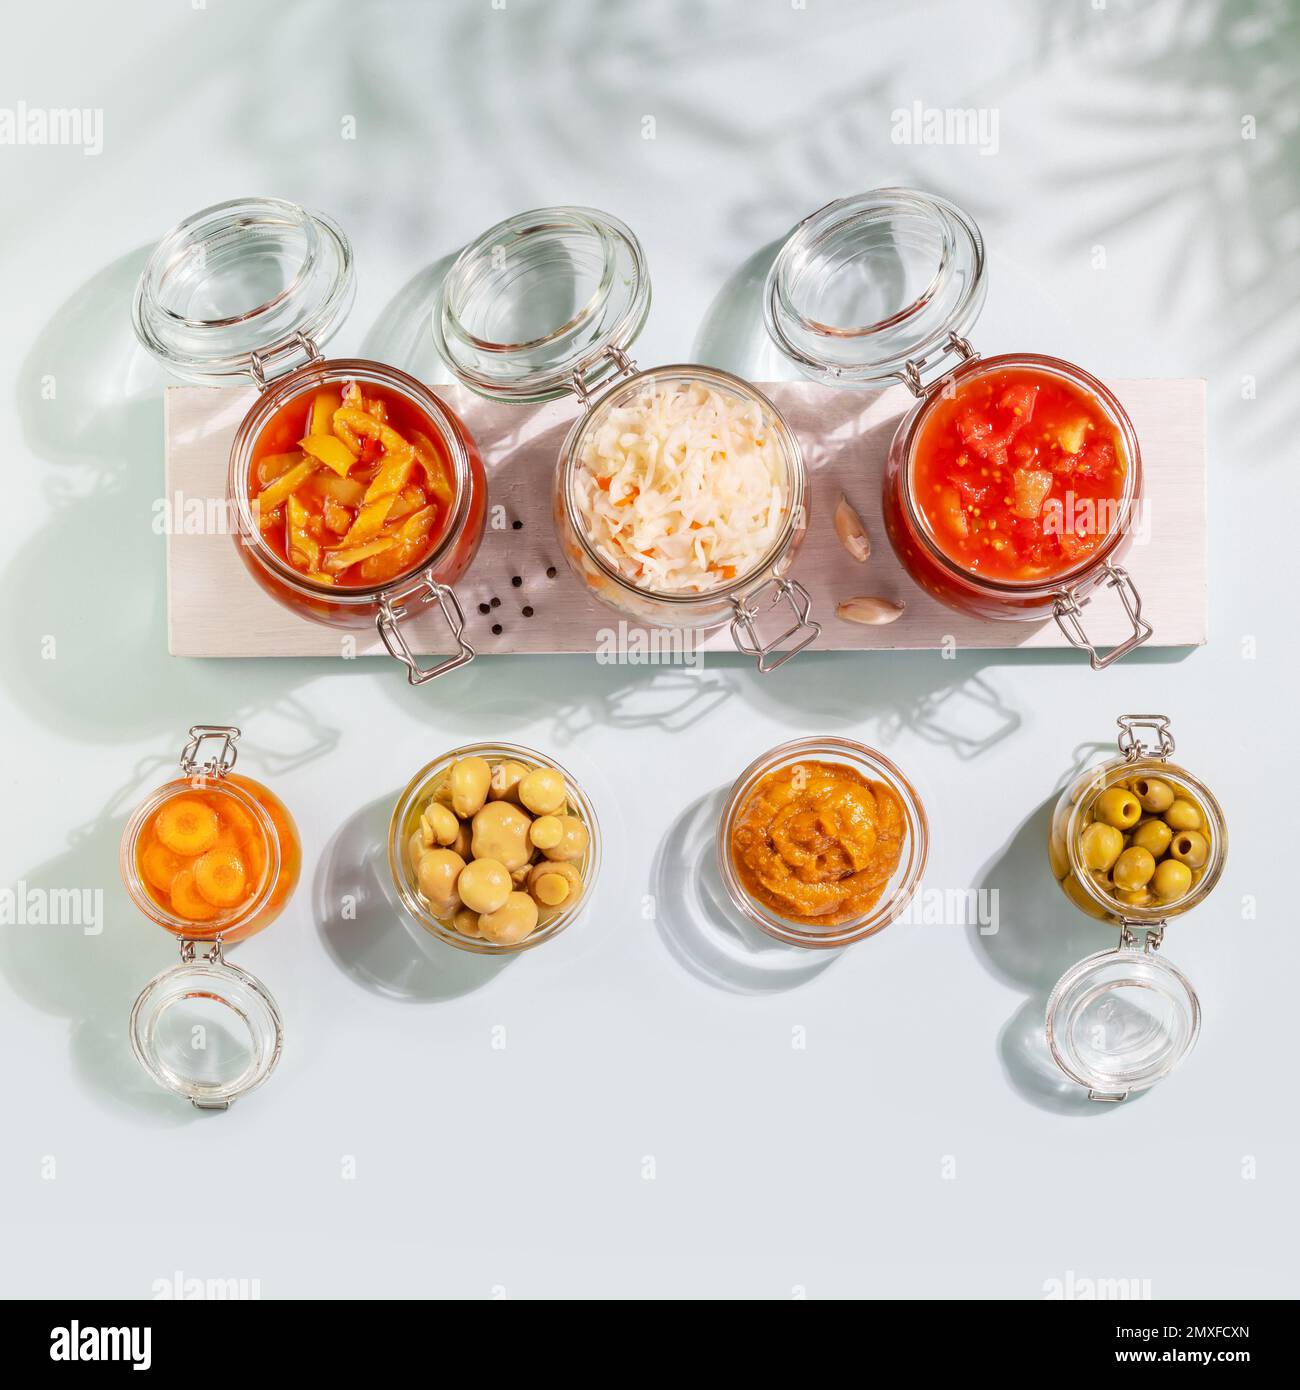 Probiotic foods. Pickled or fermented vegetables and mushrooms in glass jars on white wooden board on blue background with shadows. Home food preservi Stock Photo